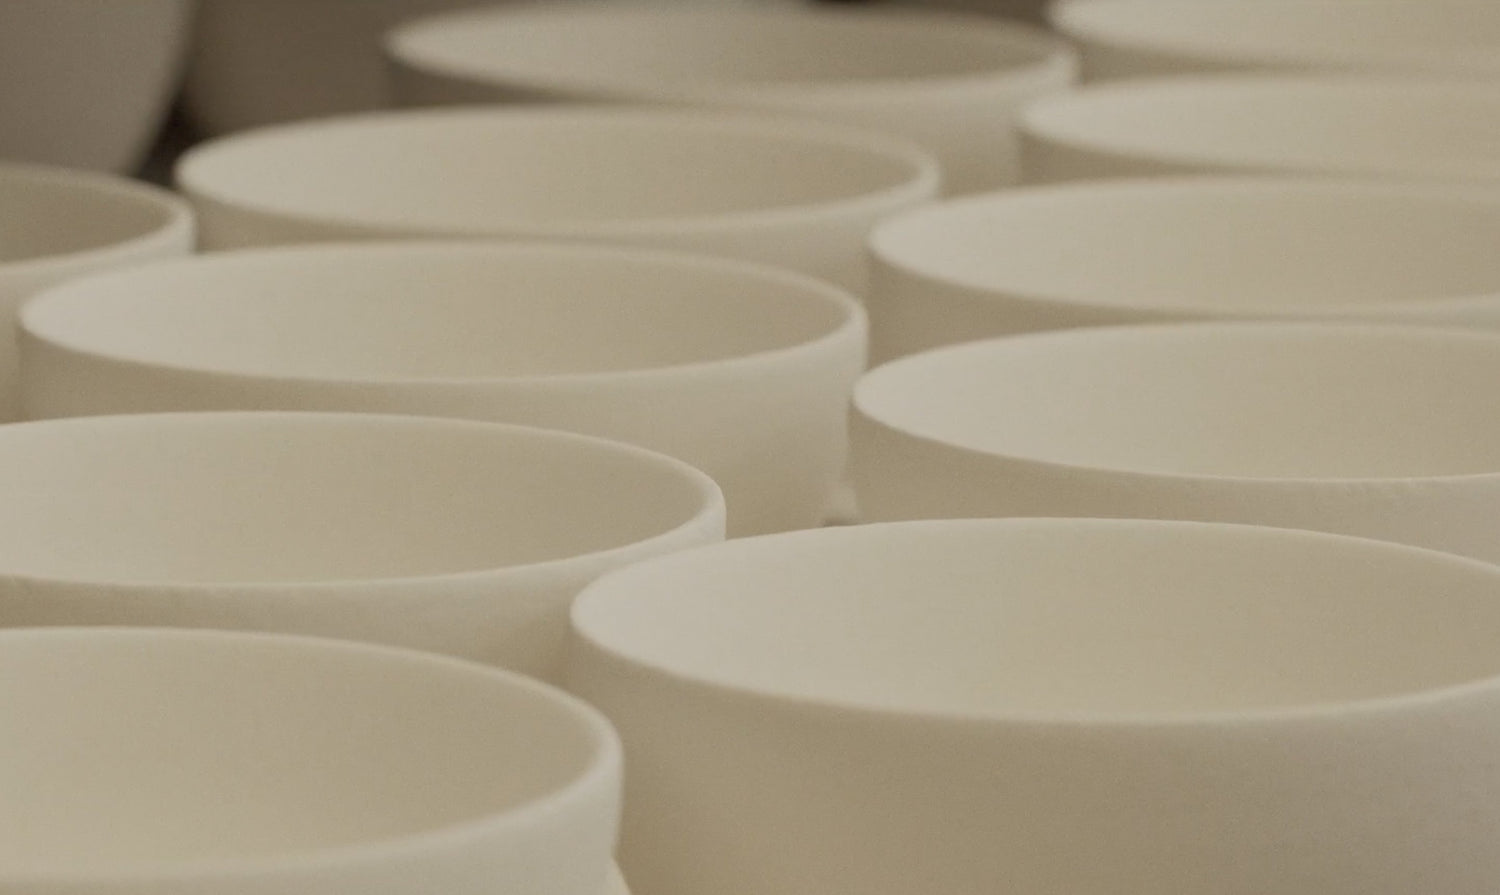 Many white bowls lined up side by side